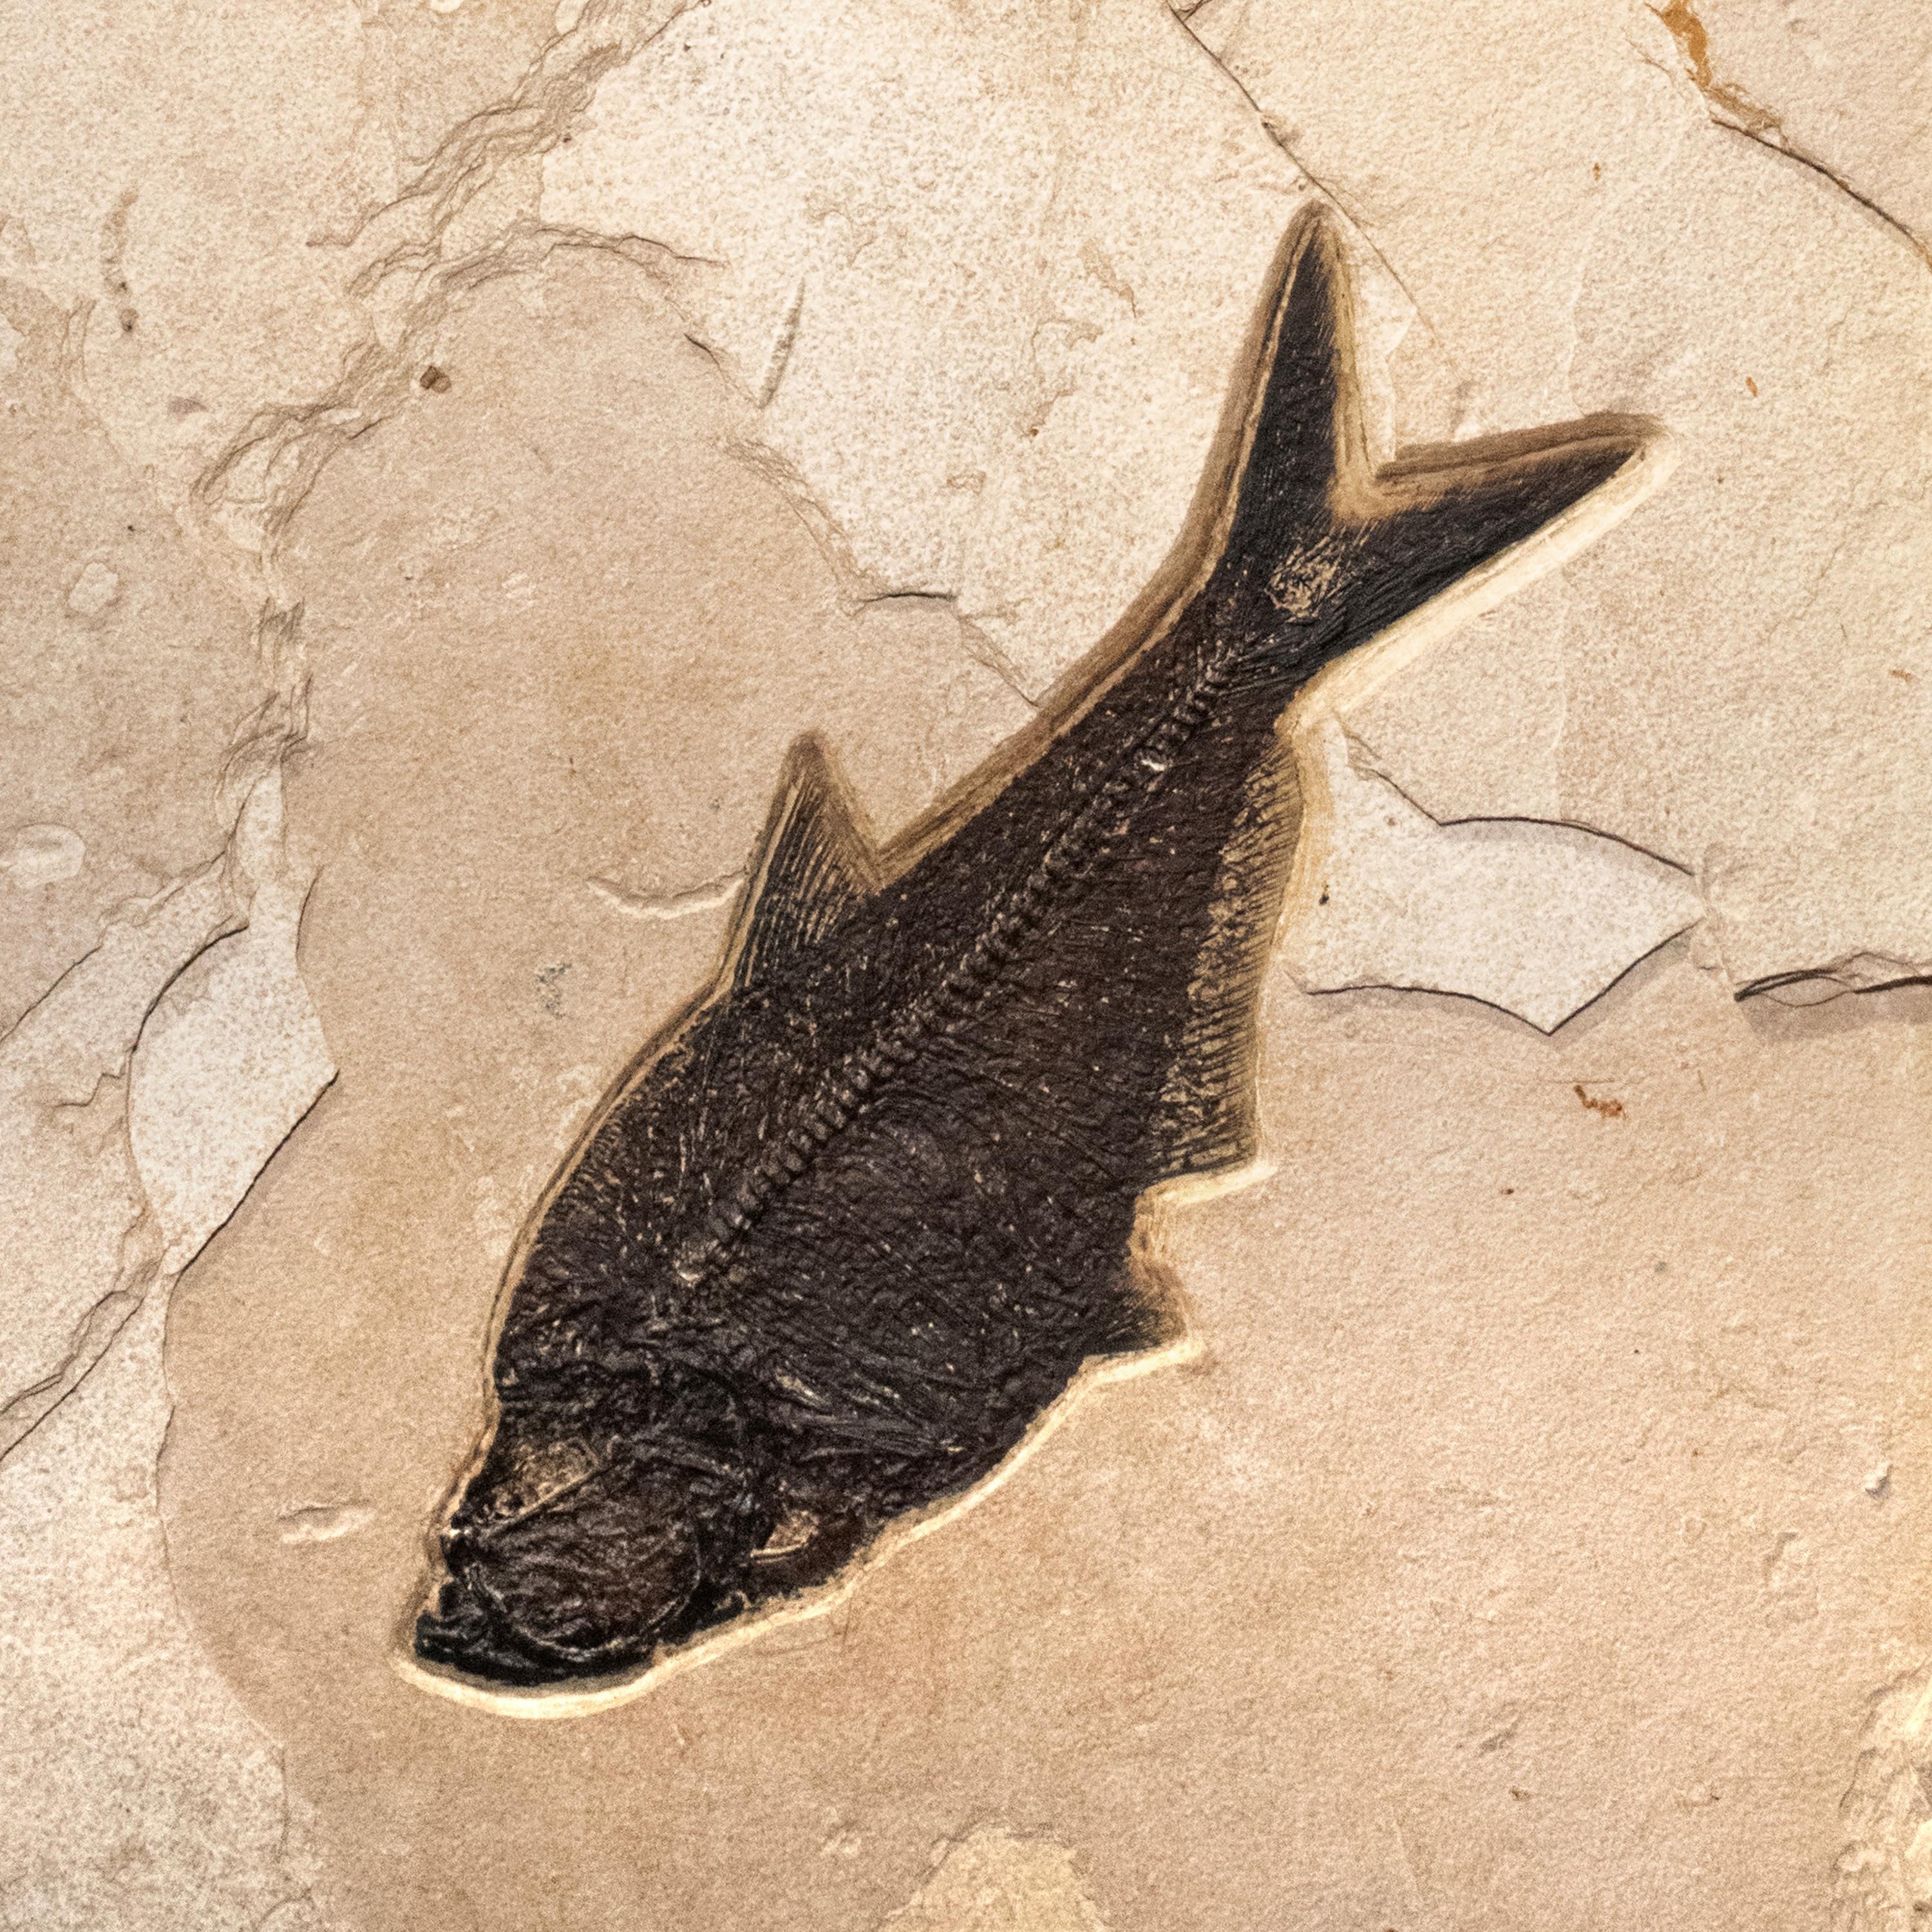 ancient fish fossil